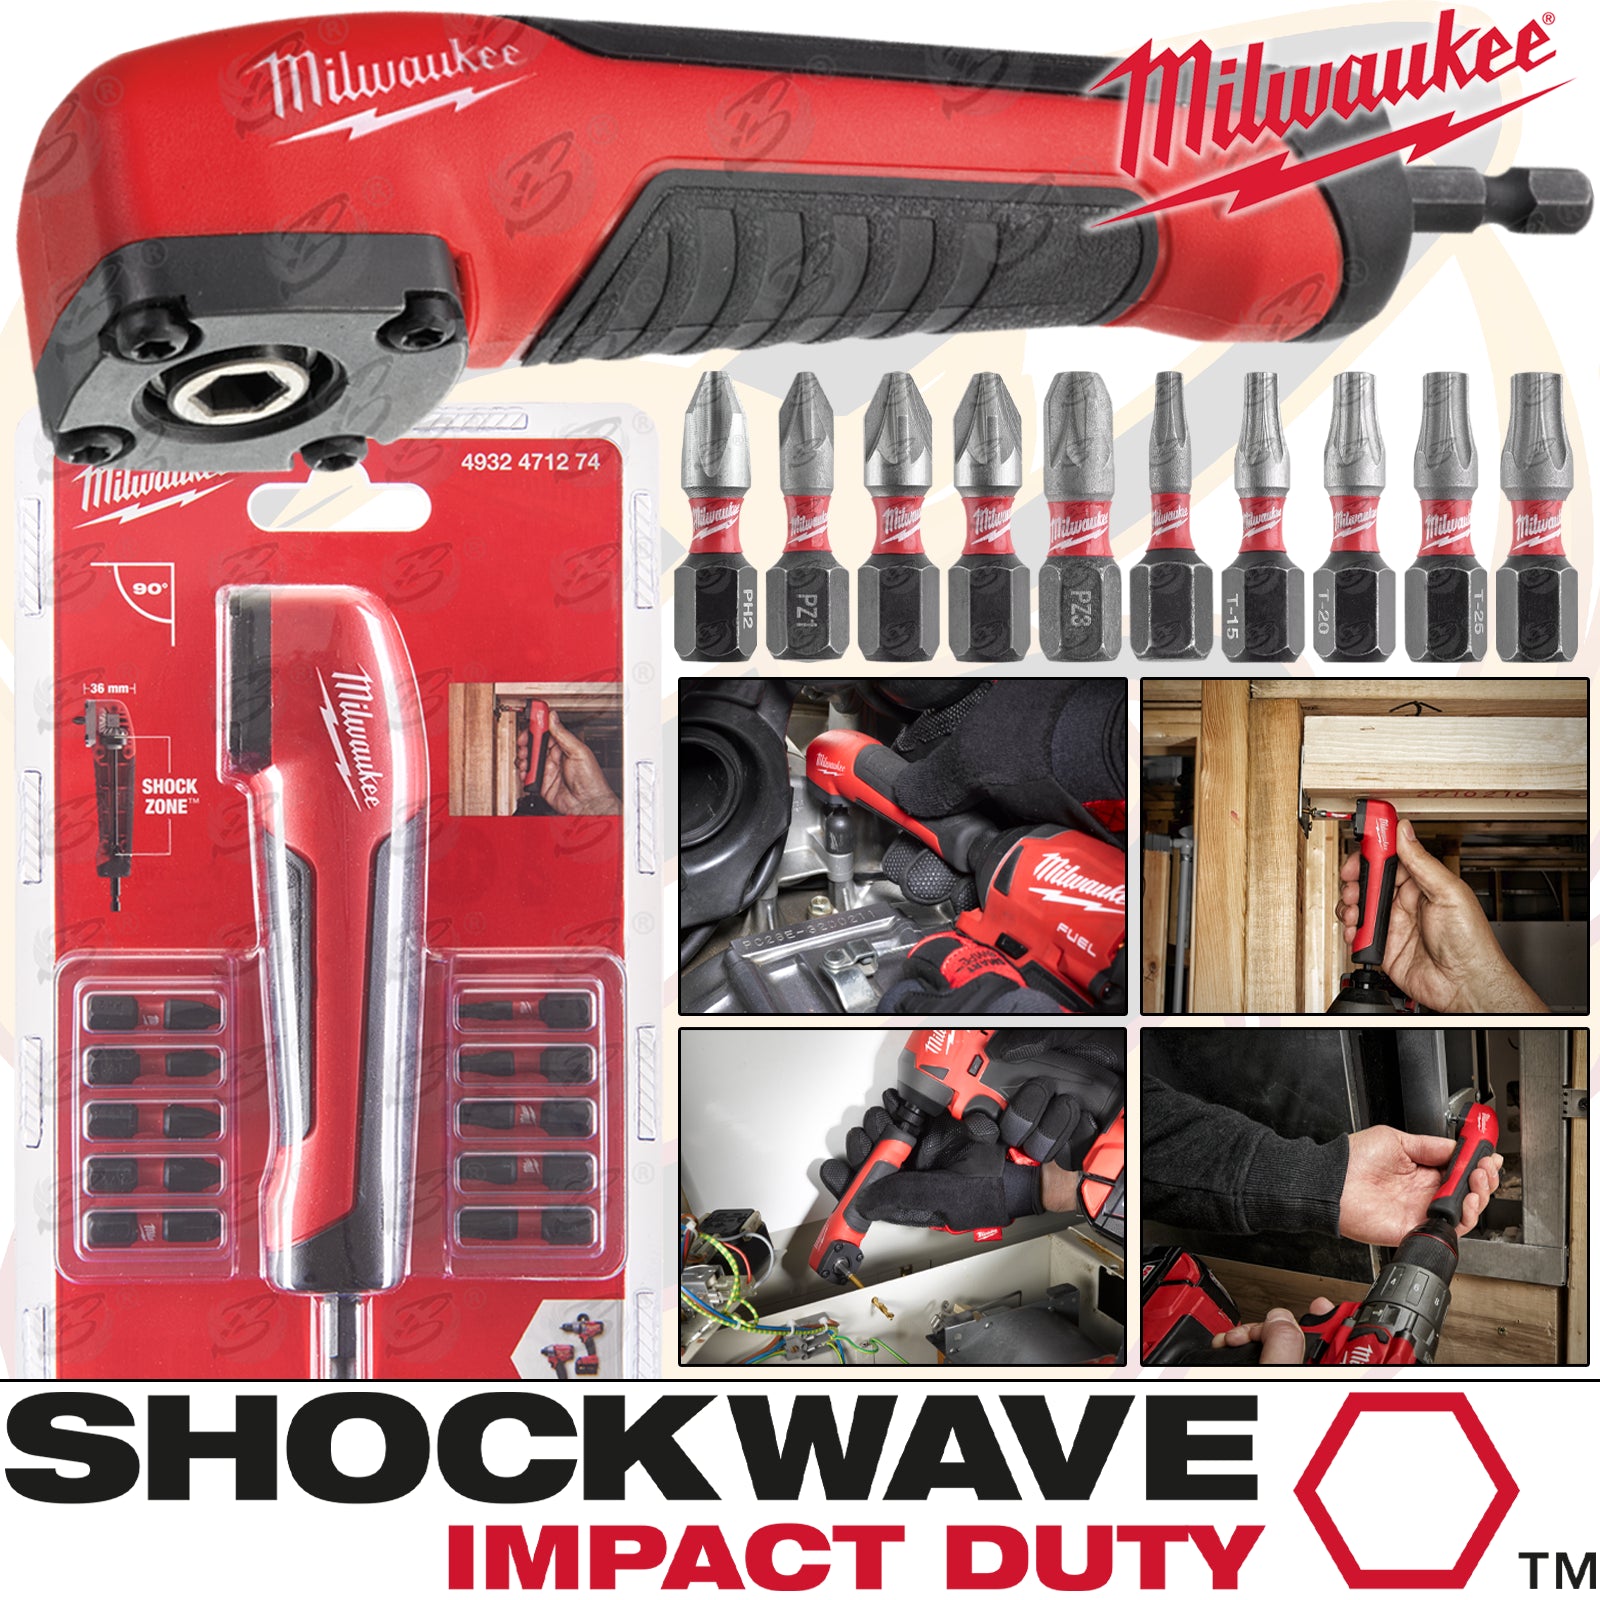 MILWAUKEE RIGHT ANGLE DRILL IMPACT DRILL / DRIVER ATTACHMENT ( SHOCKWAVE  IMPACT DUTY )